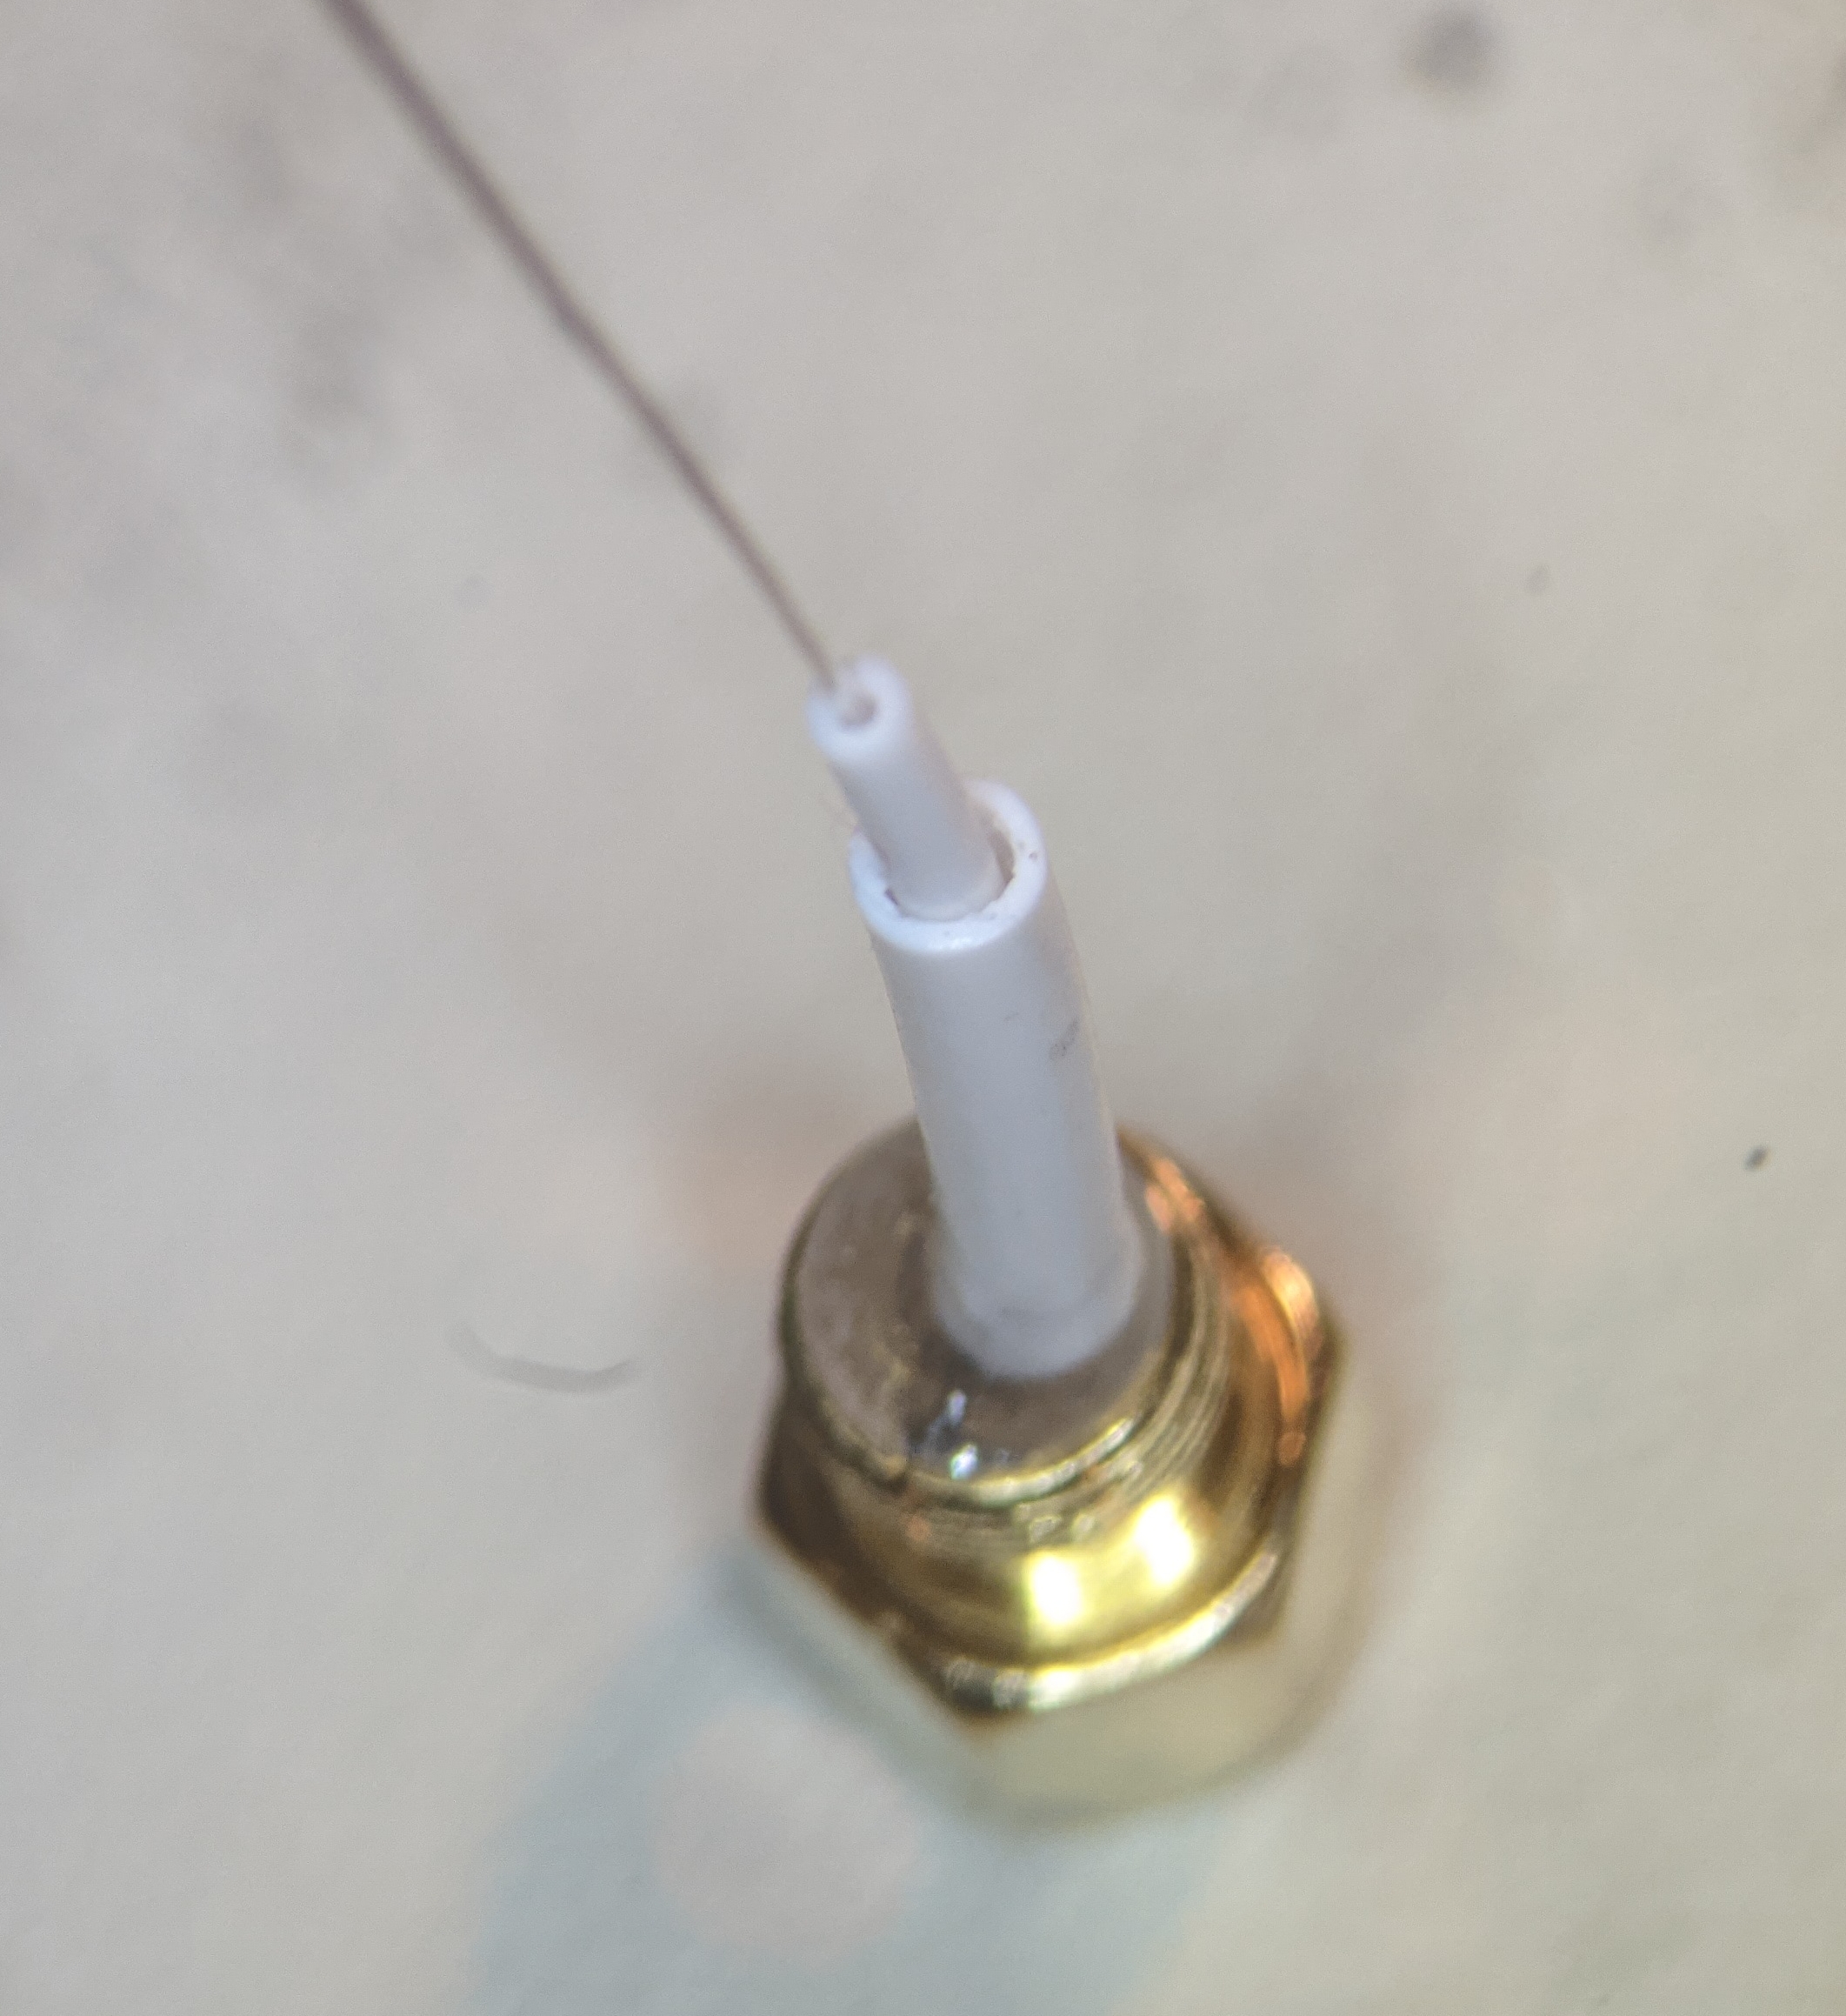 Coaxial cable outer soldered onto the SMA adapter with thin silicone tube.